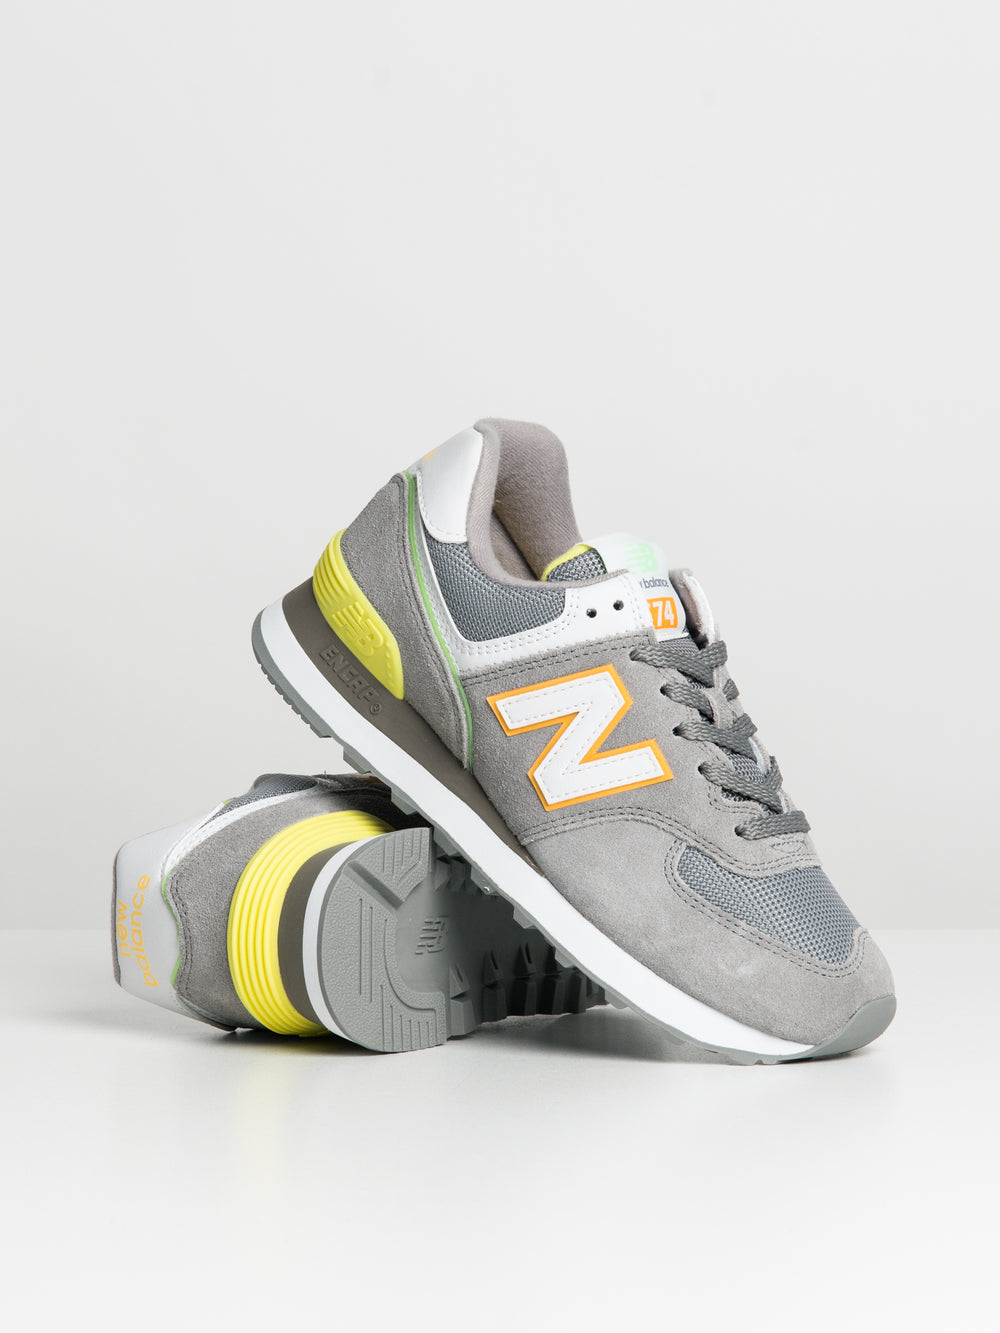 WOMENS NEW BALANCE THE 574 SNEAKERS - CLEARANCE